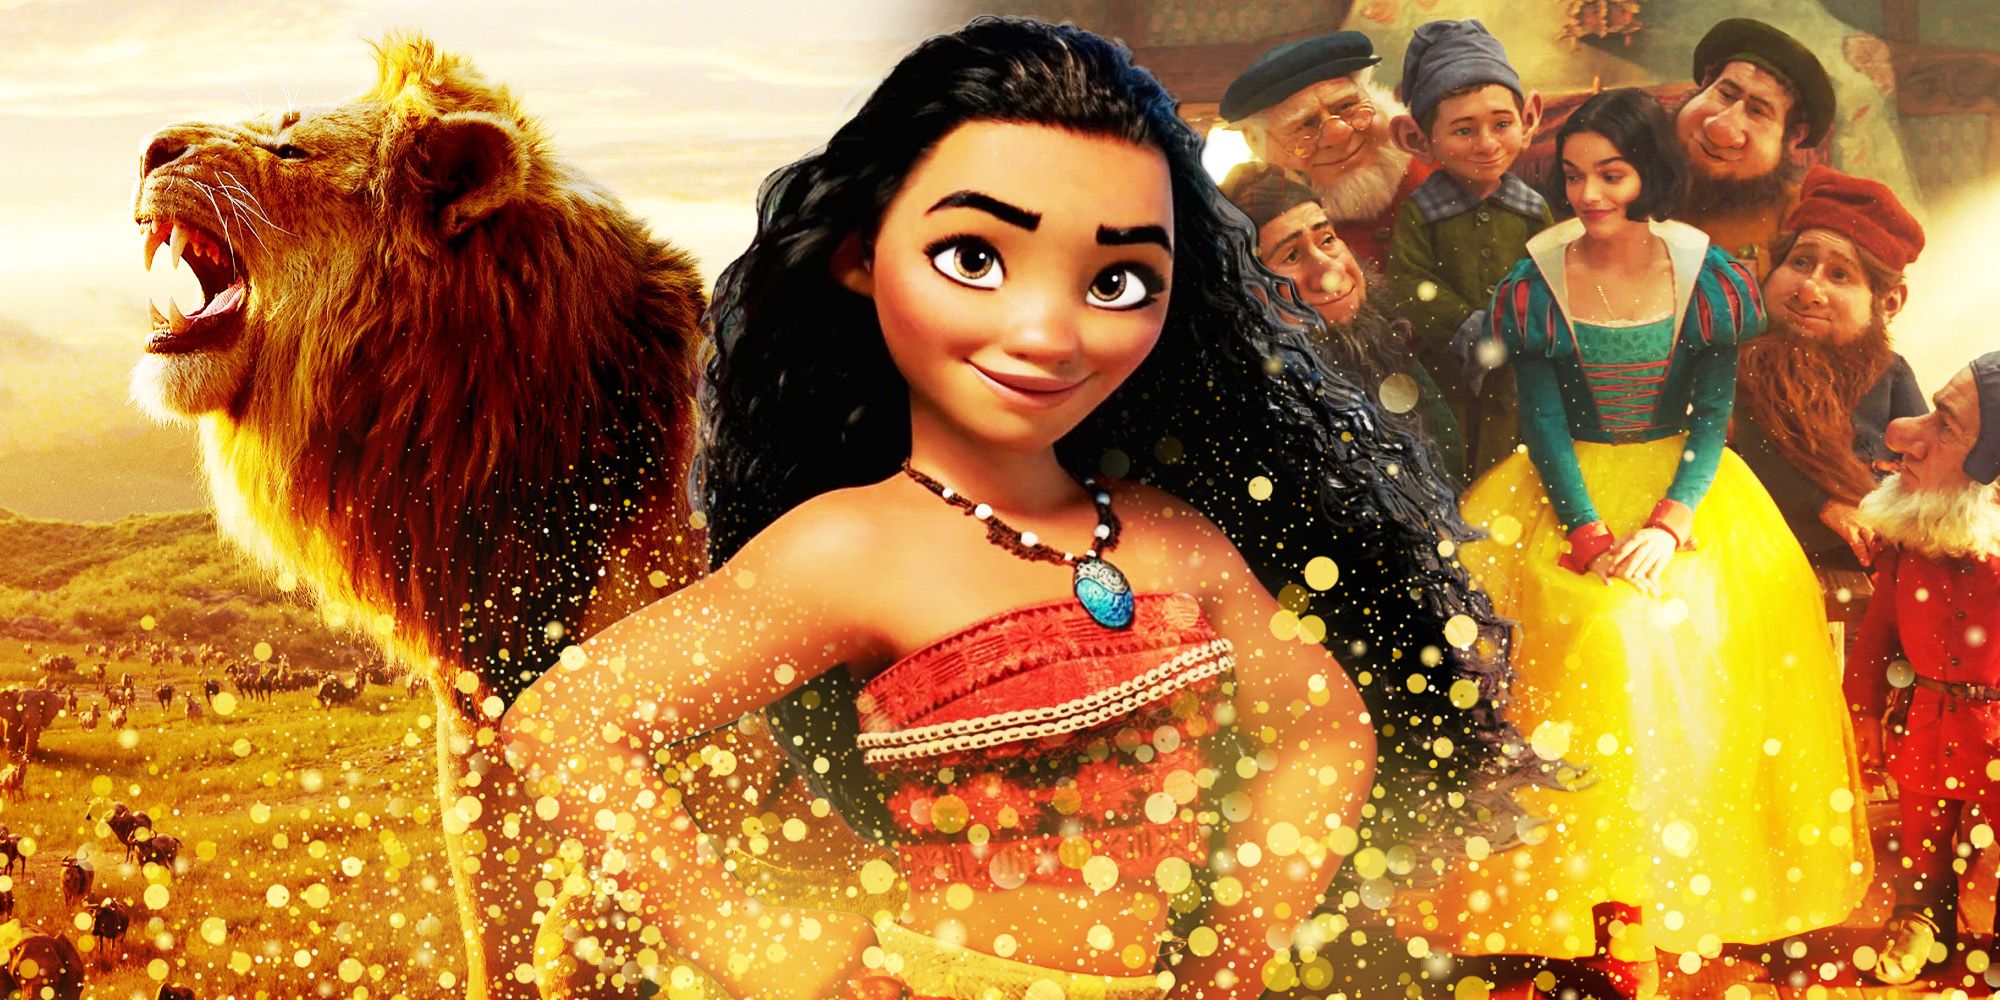 Moana, Snow White, and The Lion King